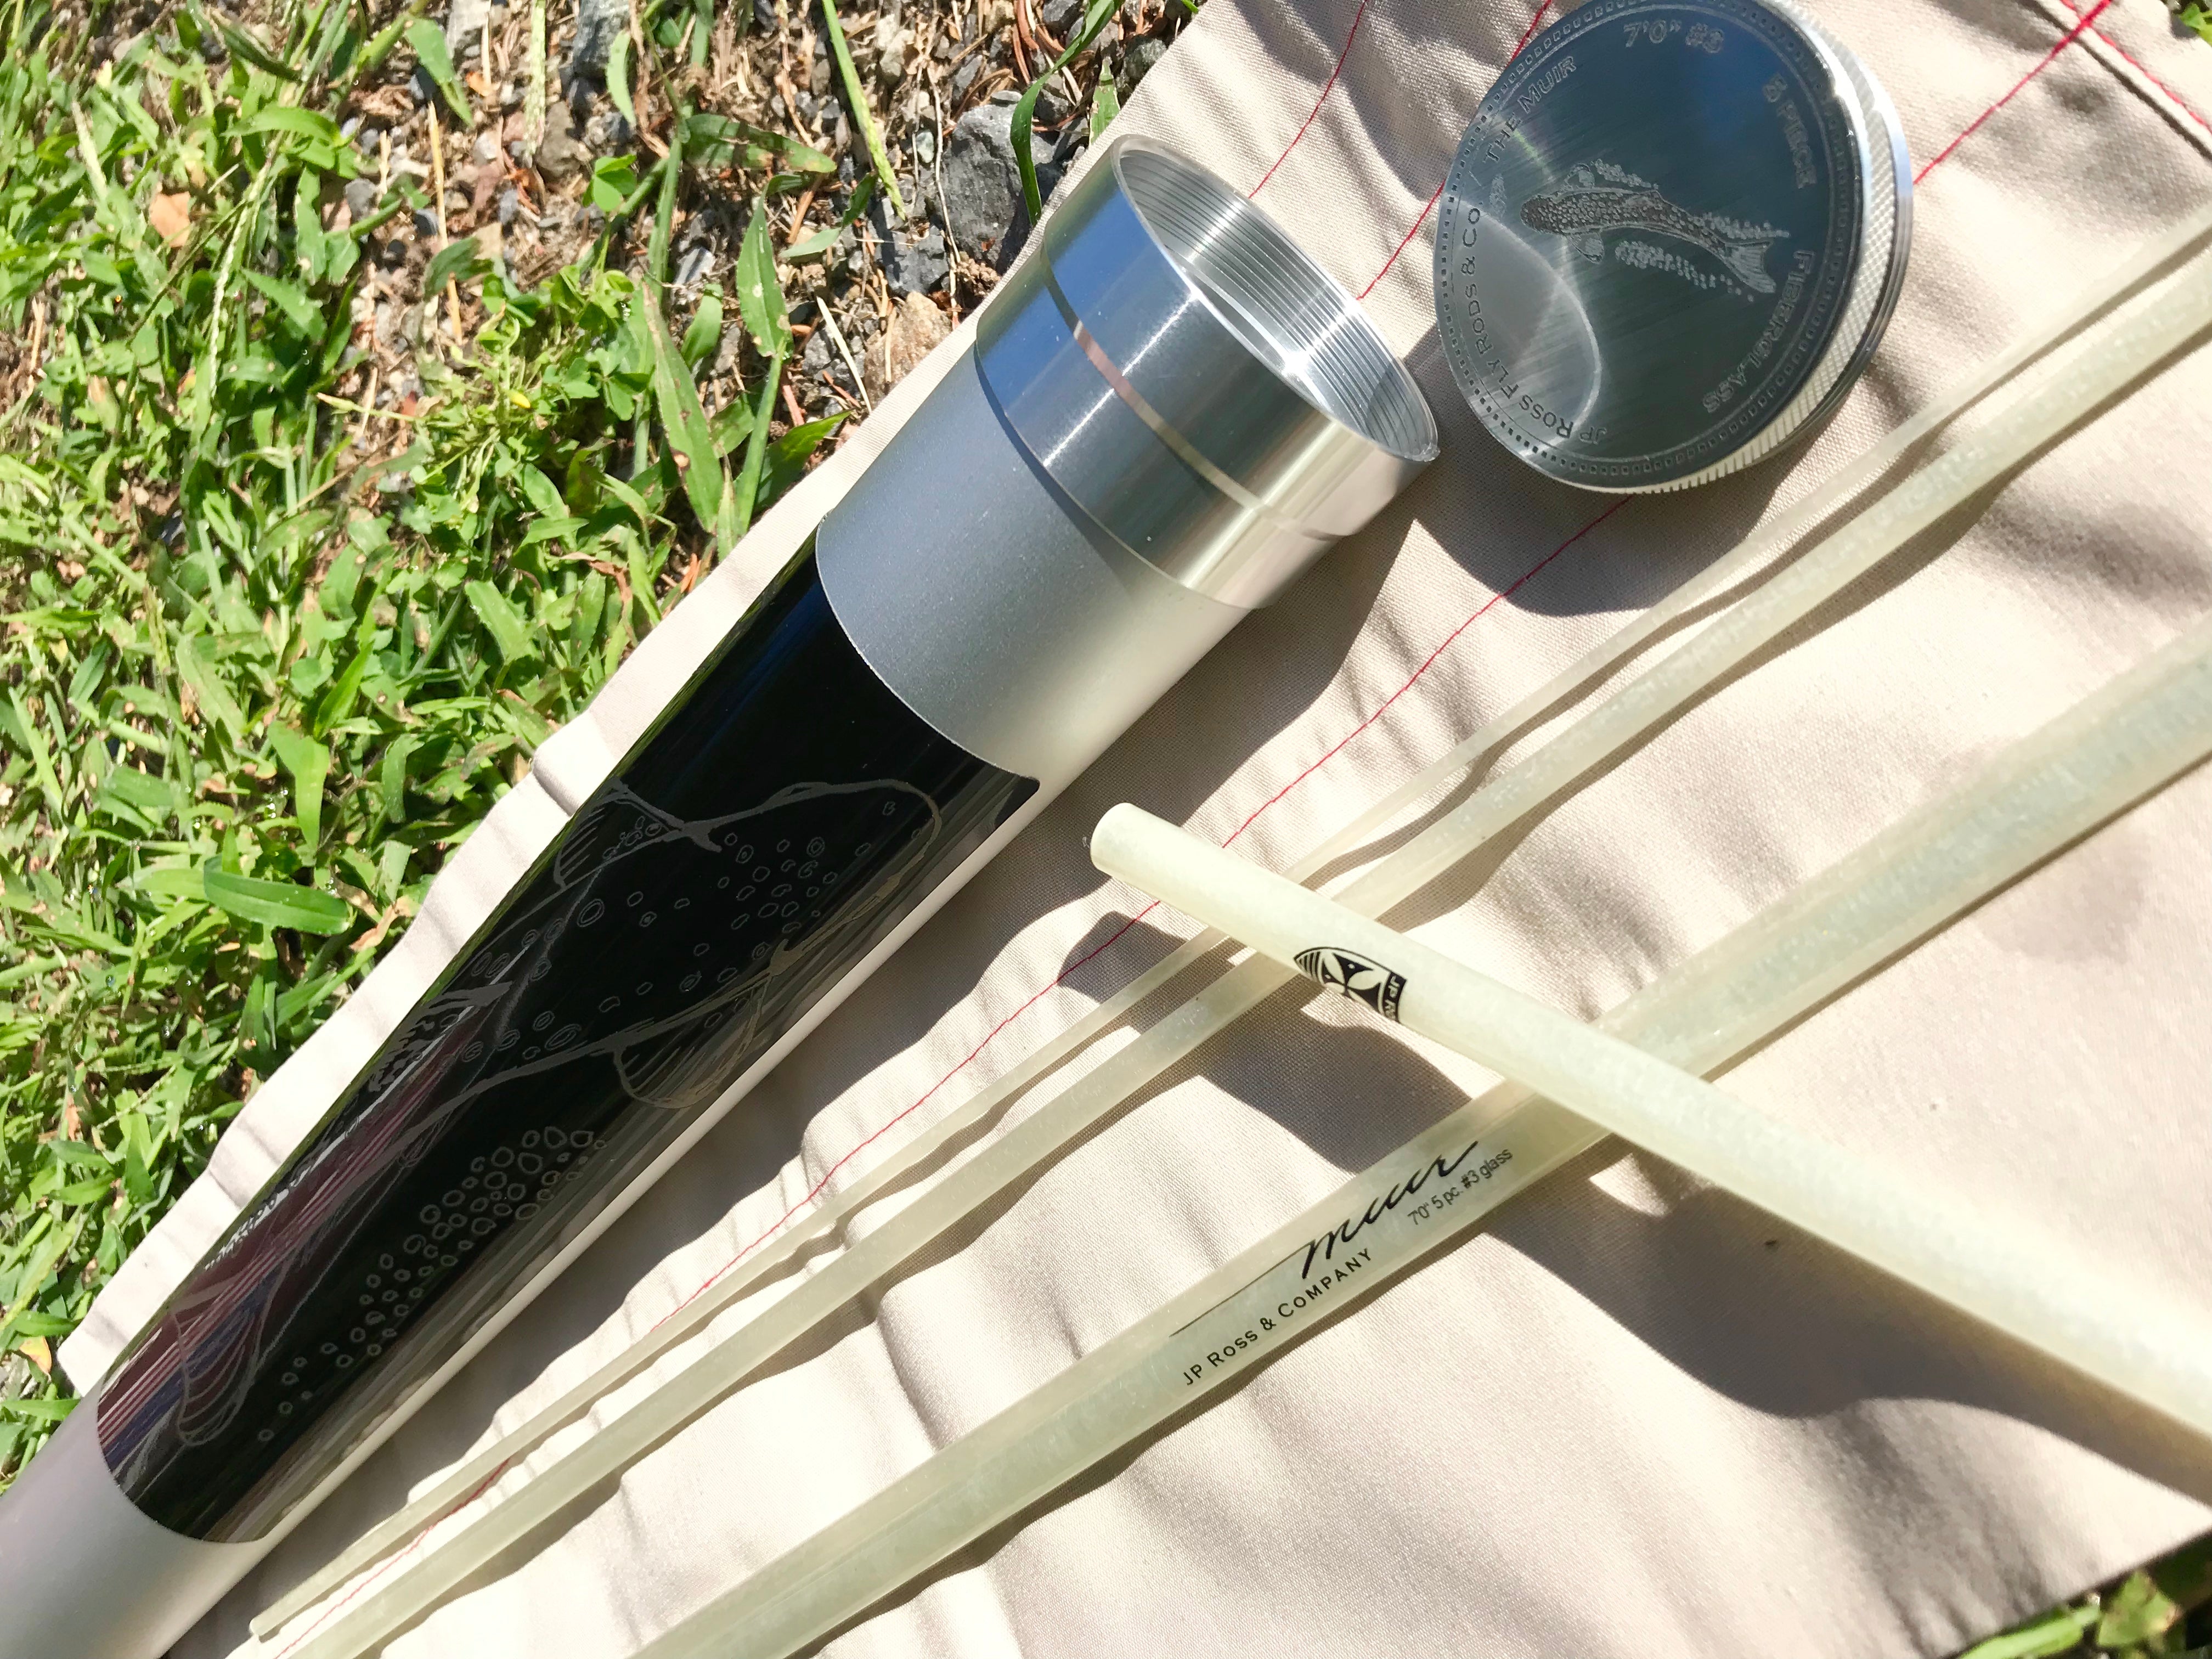 MUIR BLANK 7 foot 3 weight 5 piece glass... fiberglass rod blank with bag, case and decals